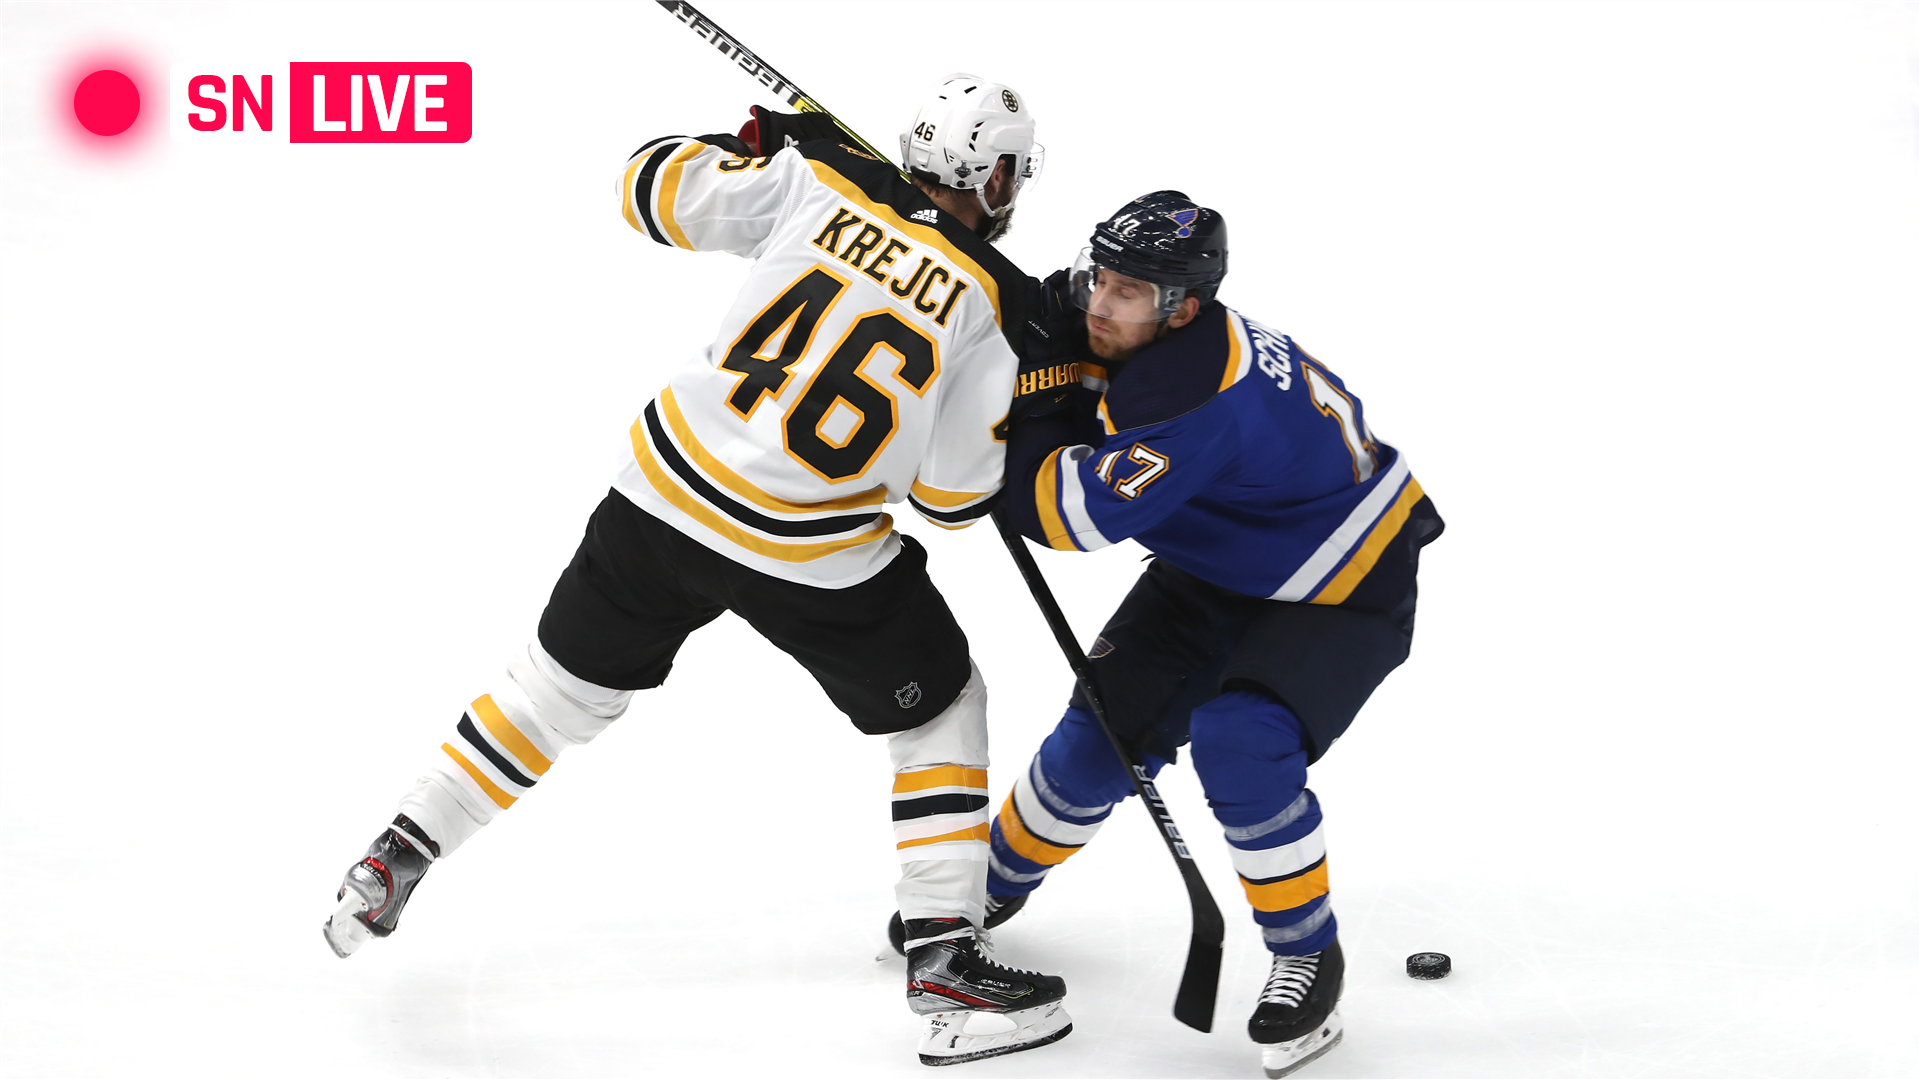 Blues vs. Bruins: Live updates, highlights from Game 5 of the 2019 Stanley Cup Final | Sporting News